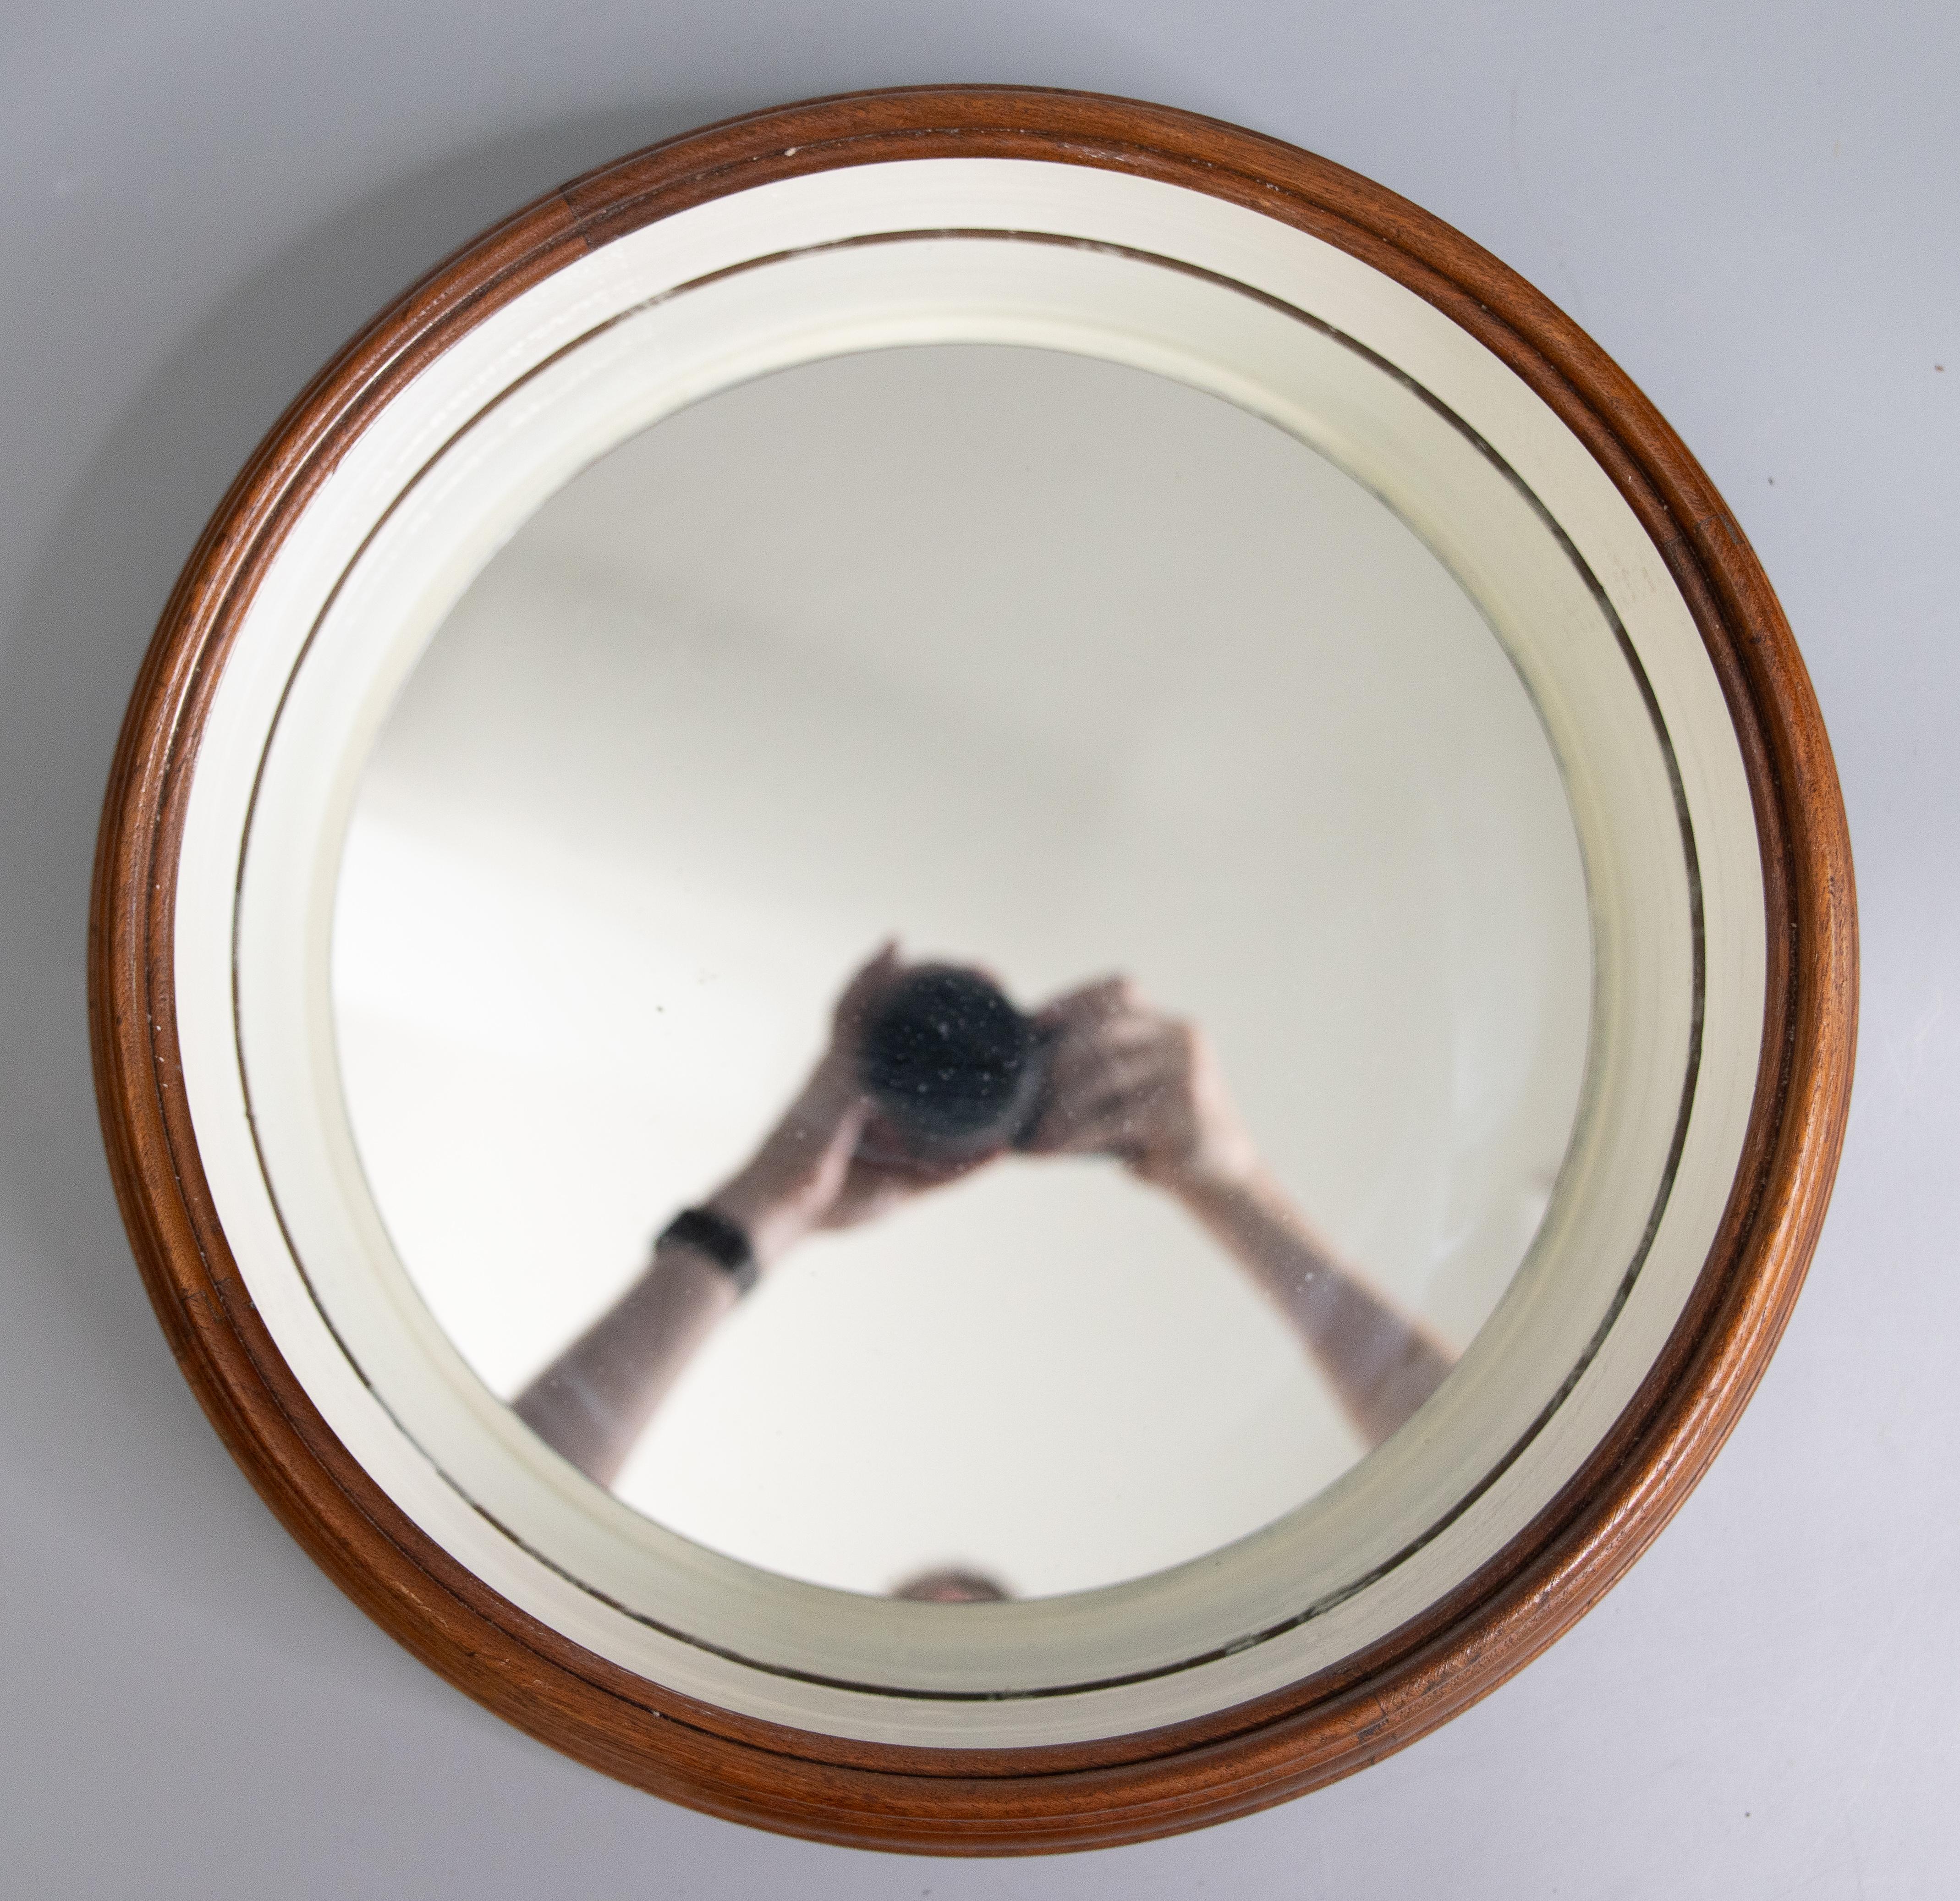 Antique English Walnut Round Porthole Mirror Circa 1920 In Good Condition For Sale In Pearland, TX